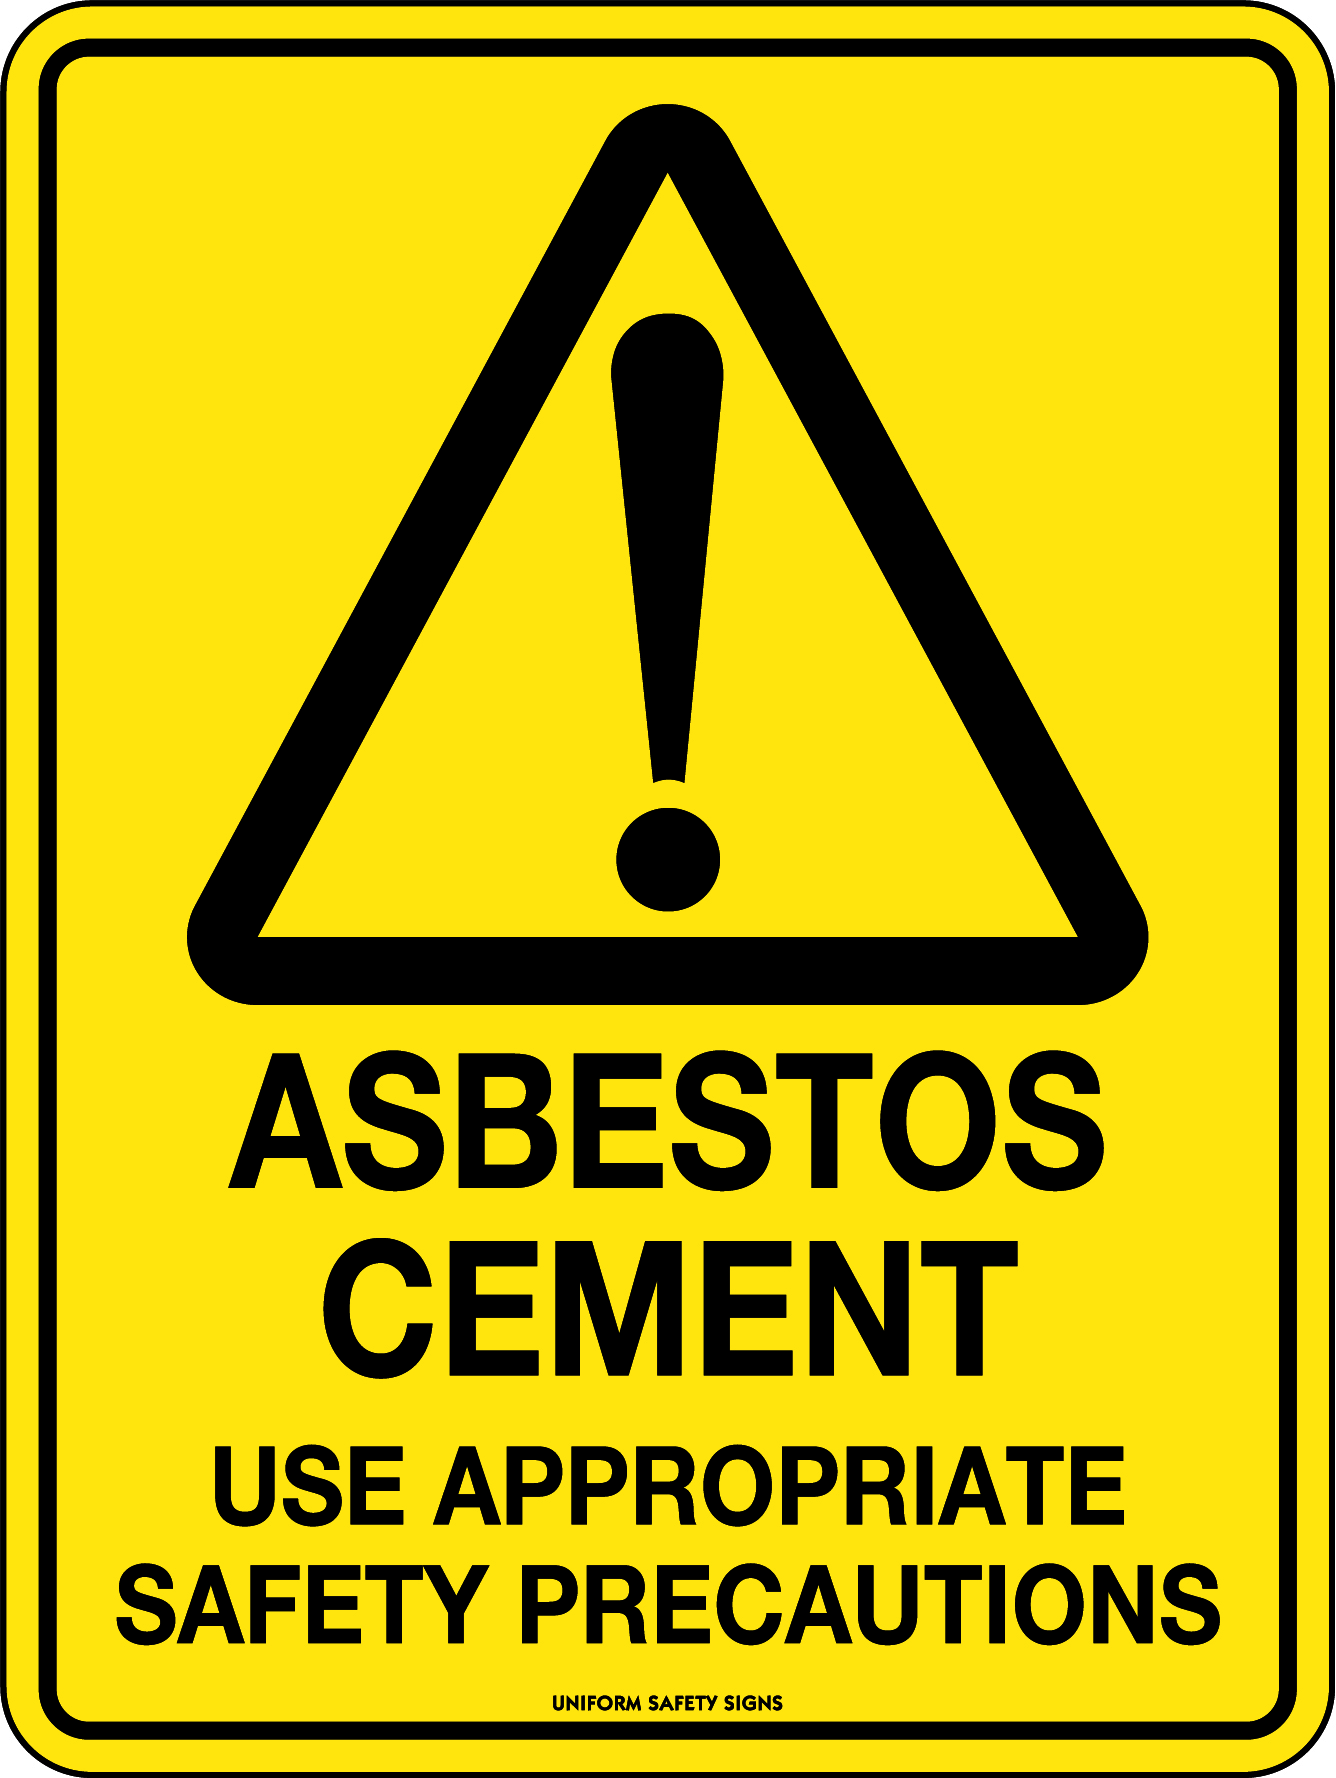 Asbestos Cement Use Appropriate Safety Precautions | Uniform Safety Signs